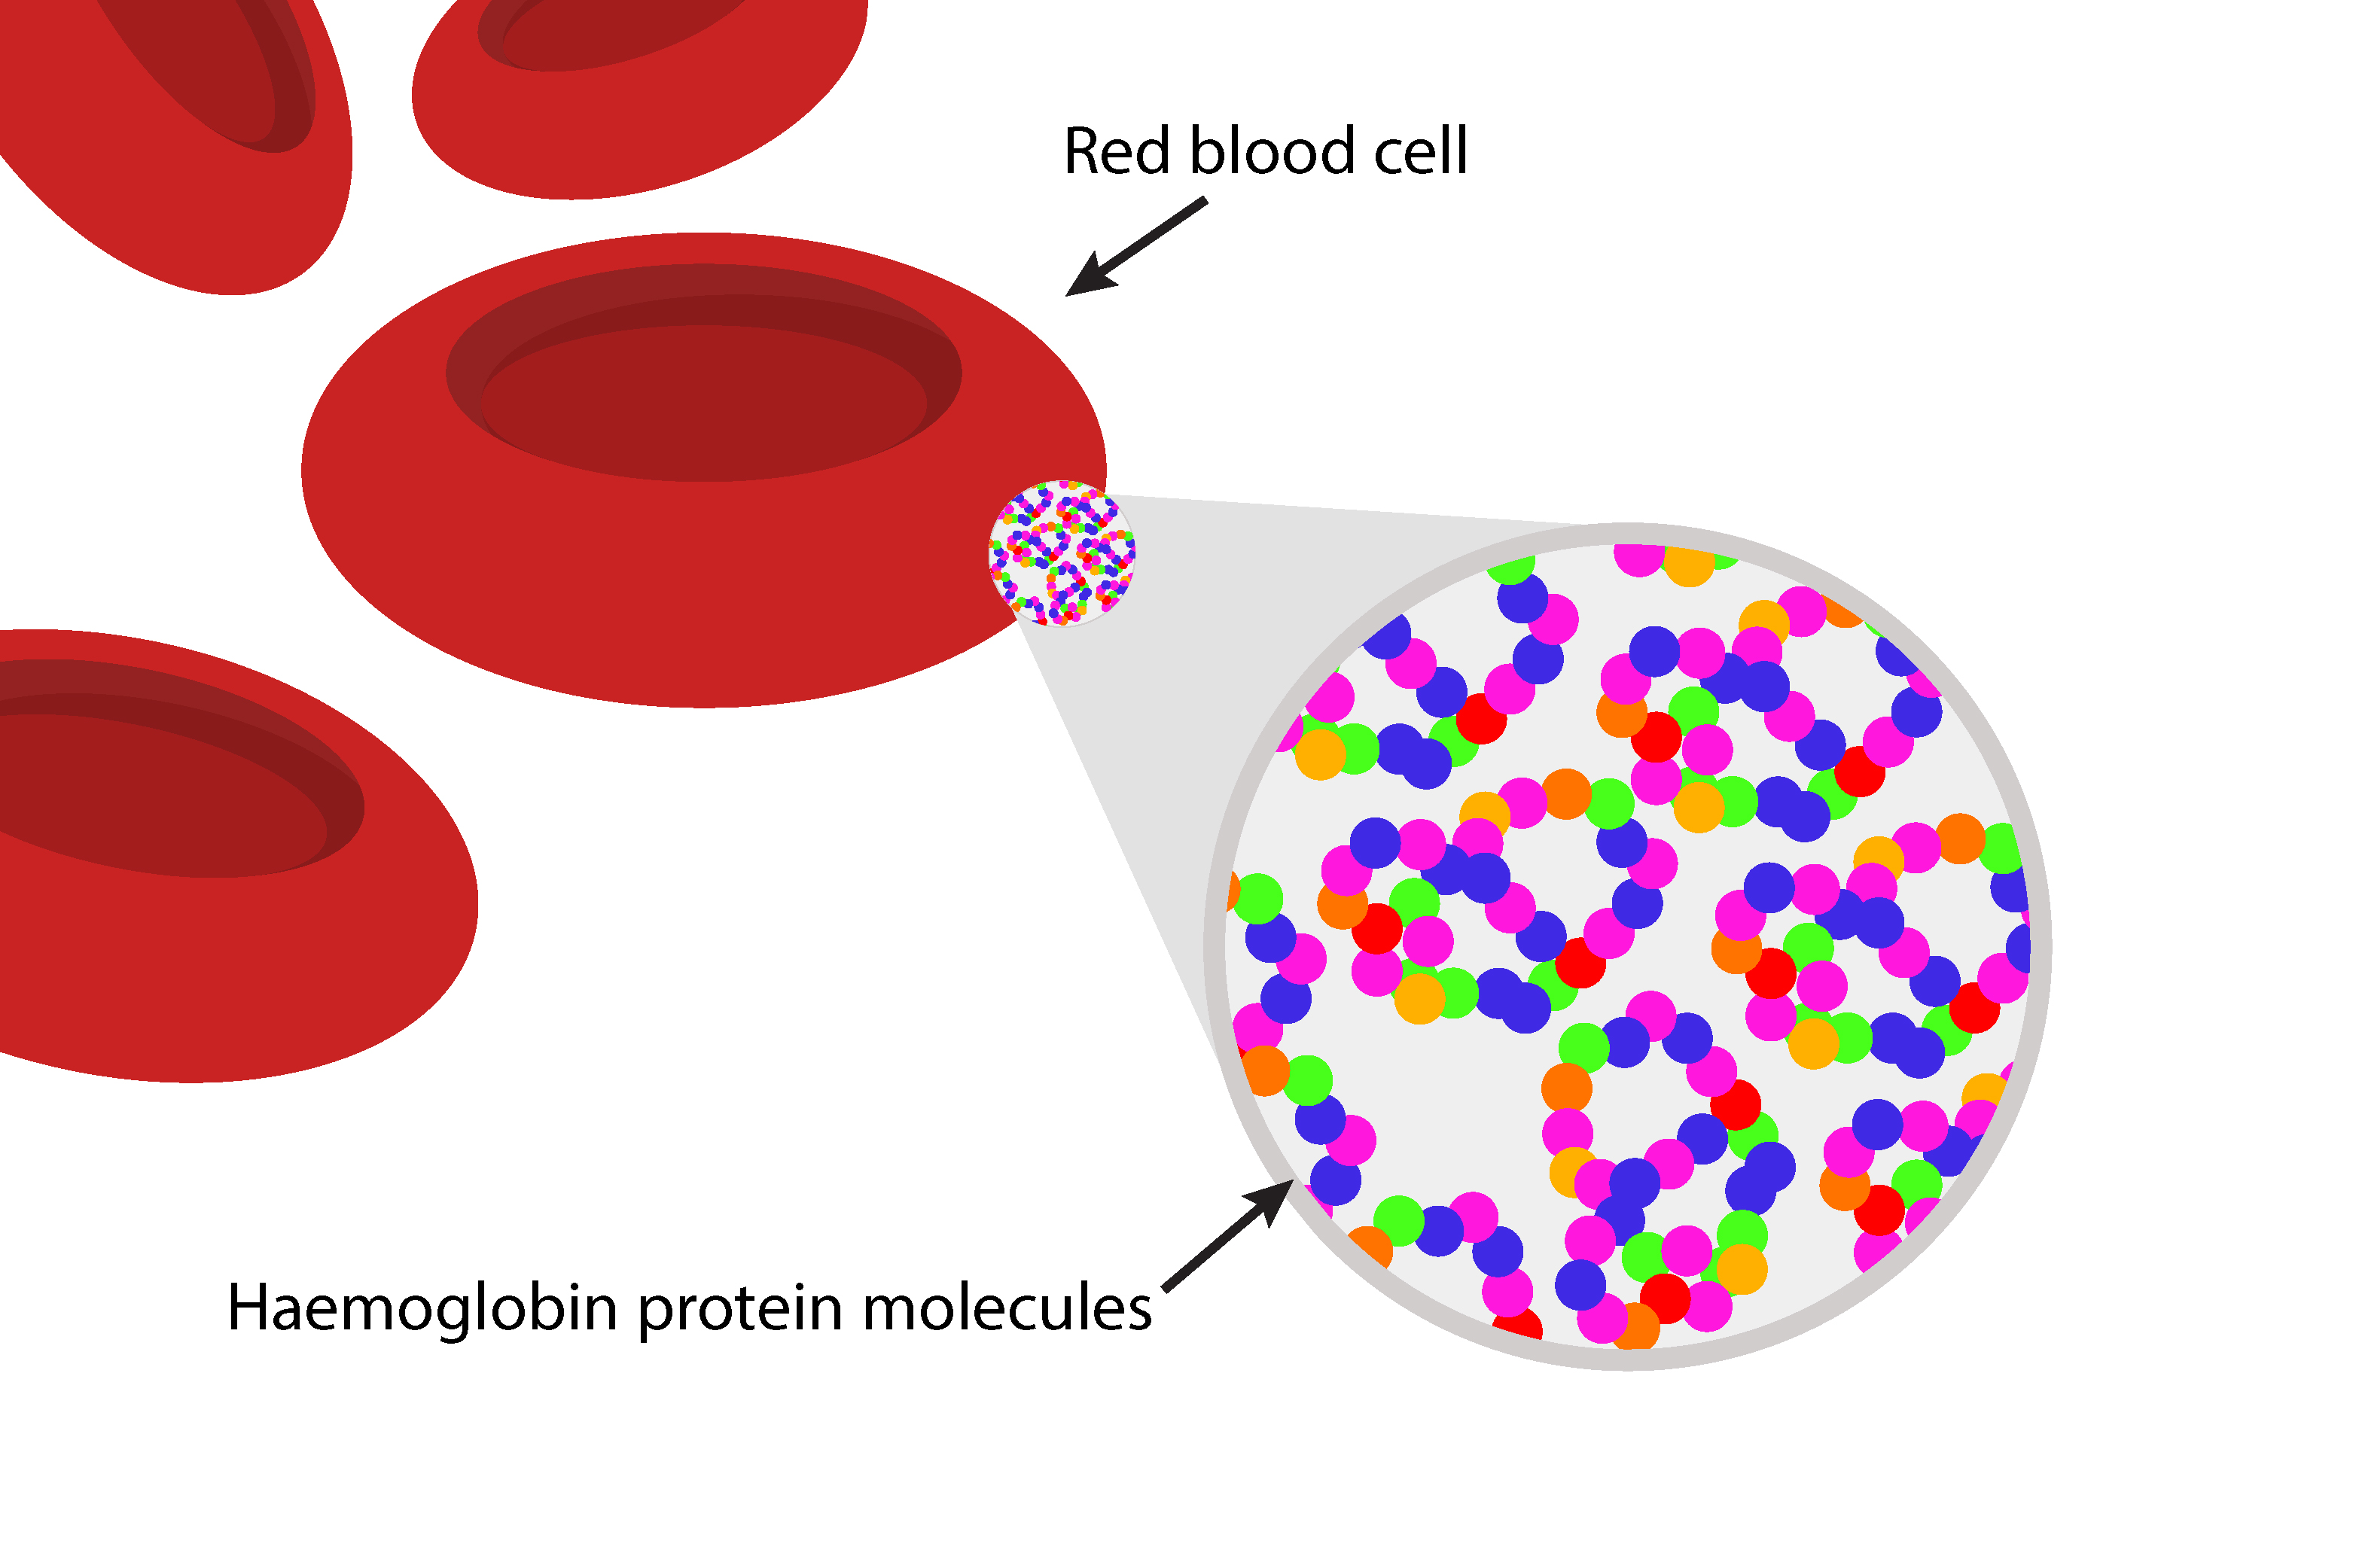 The newly formed haemoglobin protein carries oxygen in red blood cells